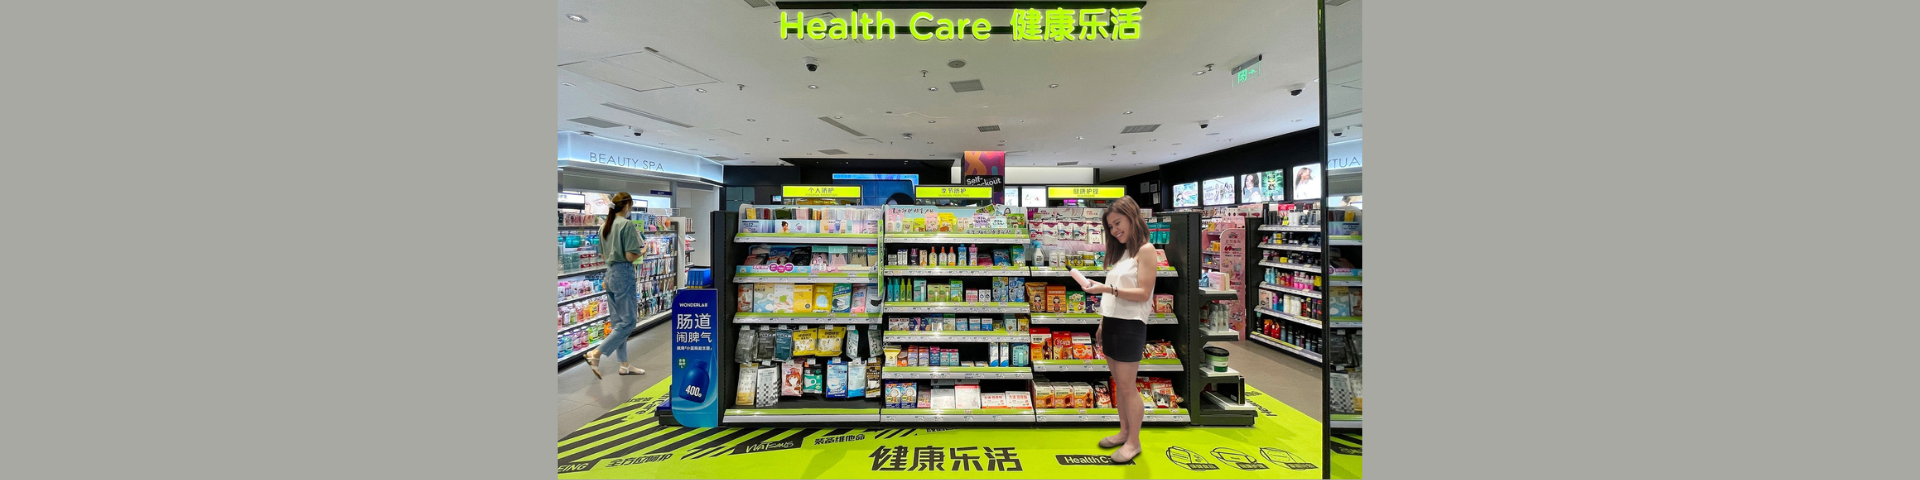 Watsons China Launches Health Care Zone